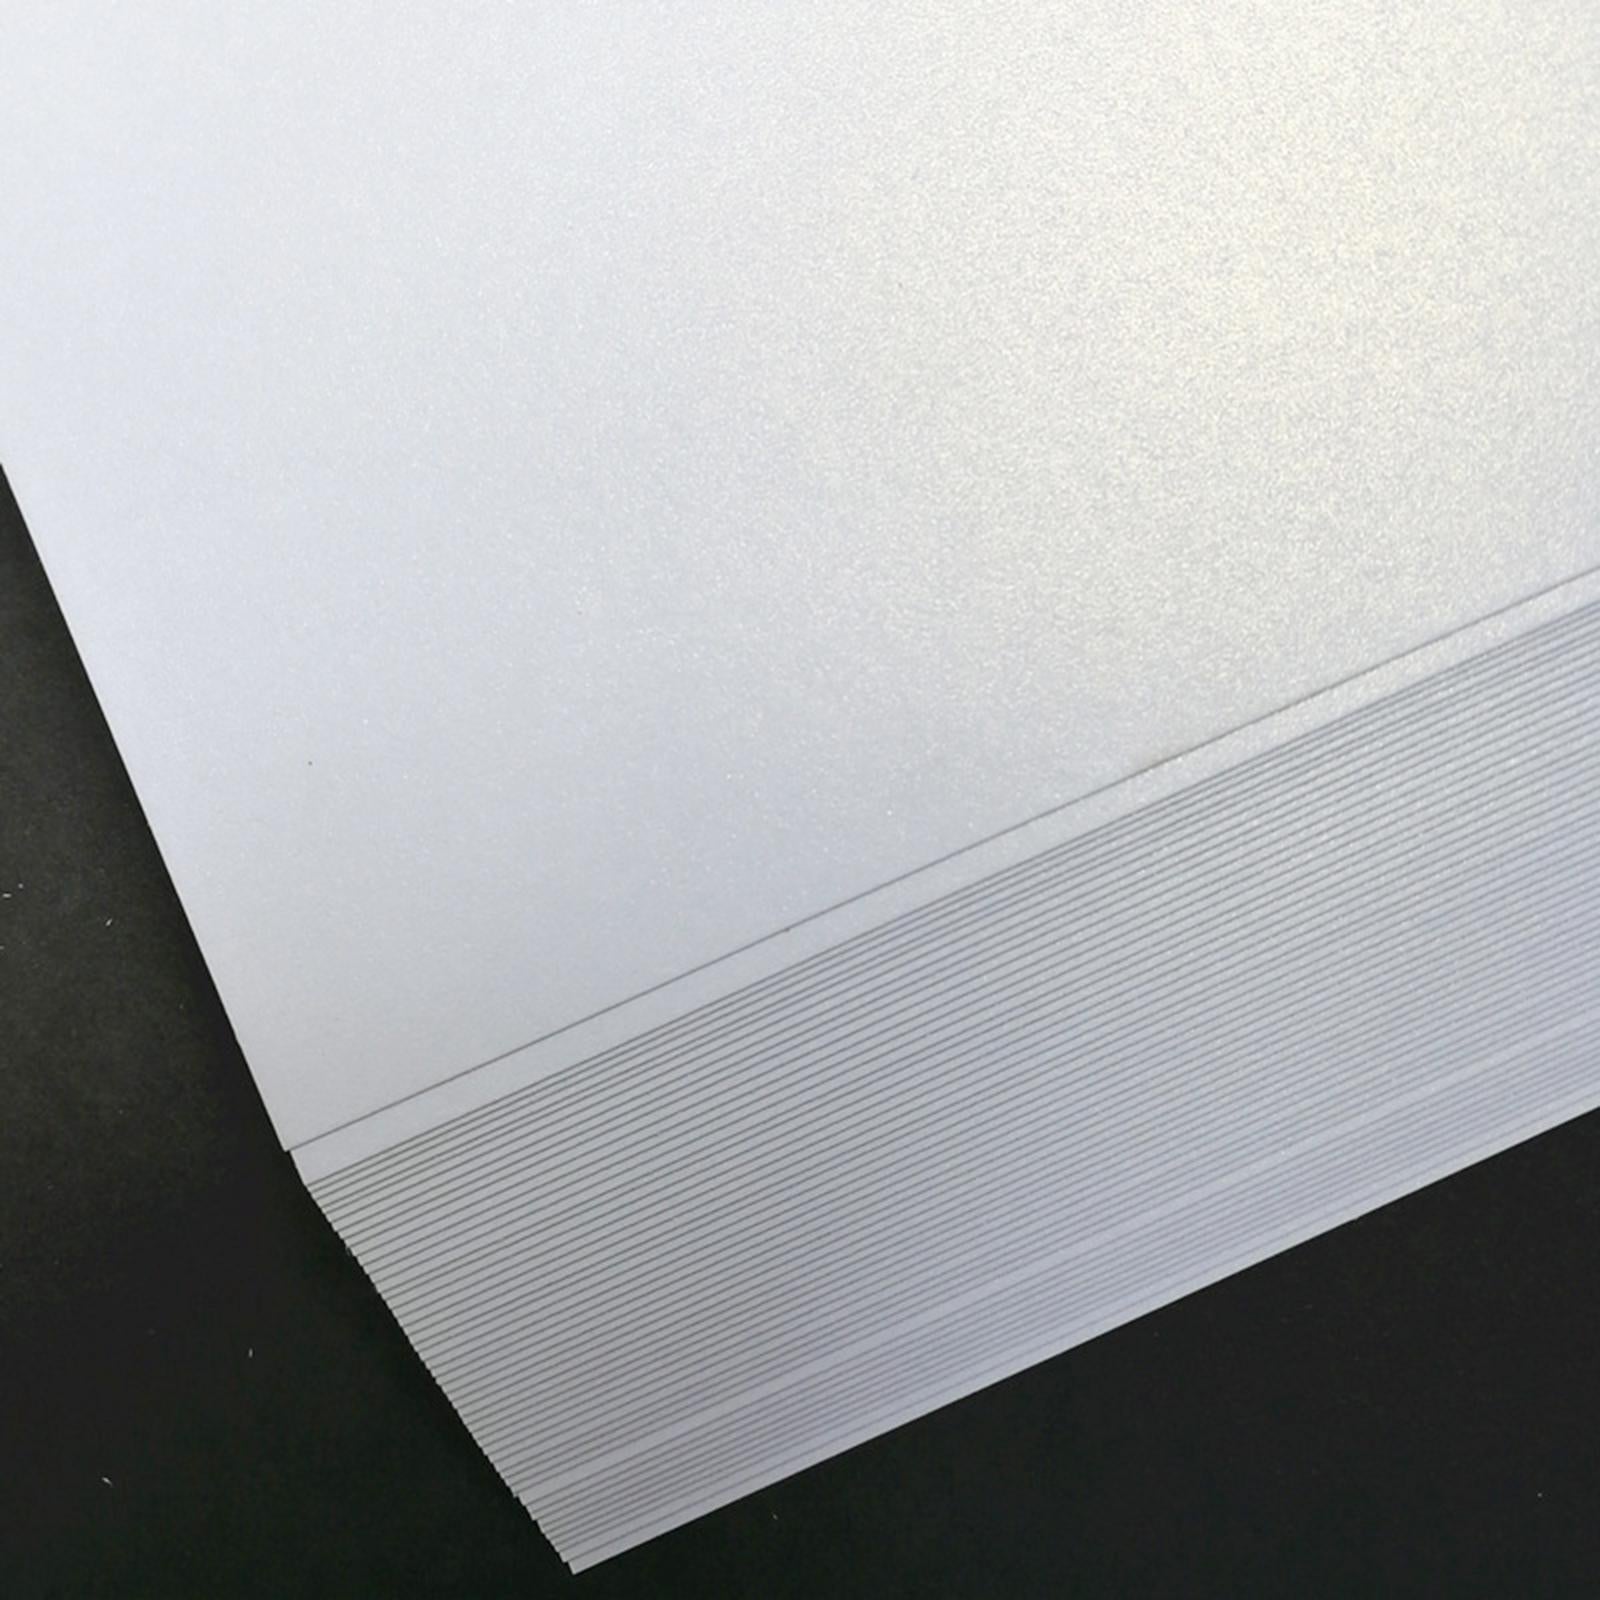 50 Sheets Pearlescent Shimmer A4 Double Sided Paper for Cardmaking & Crafts